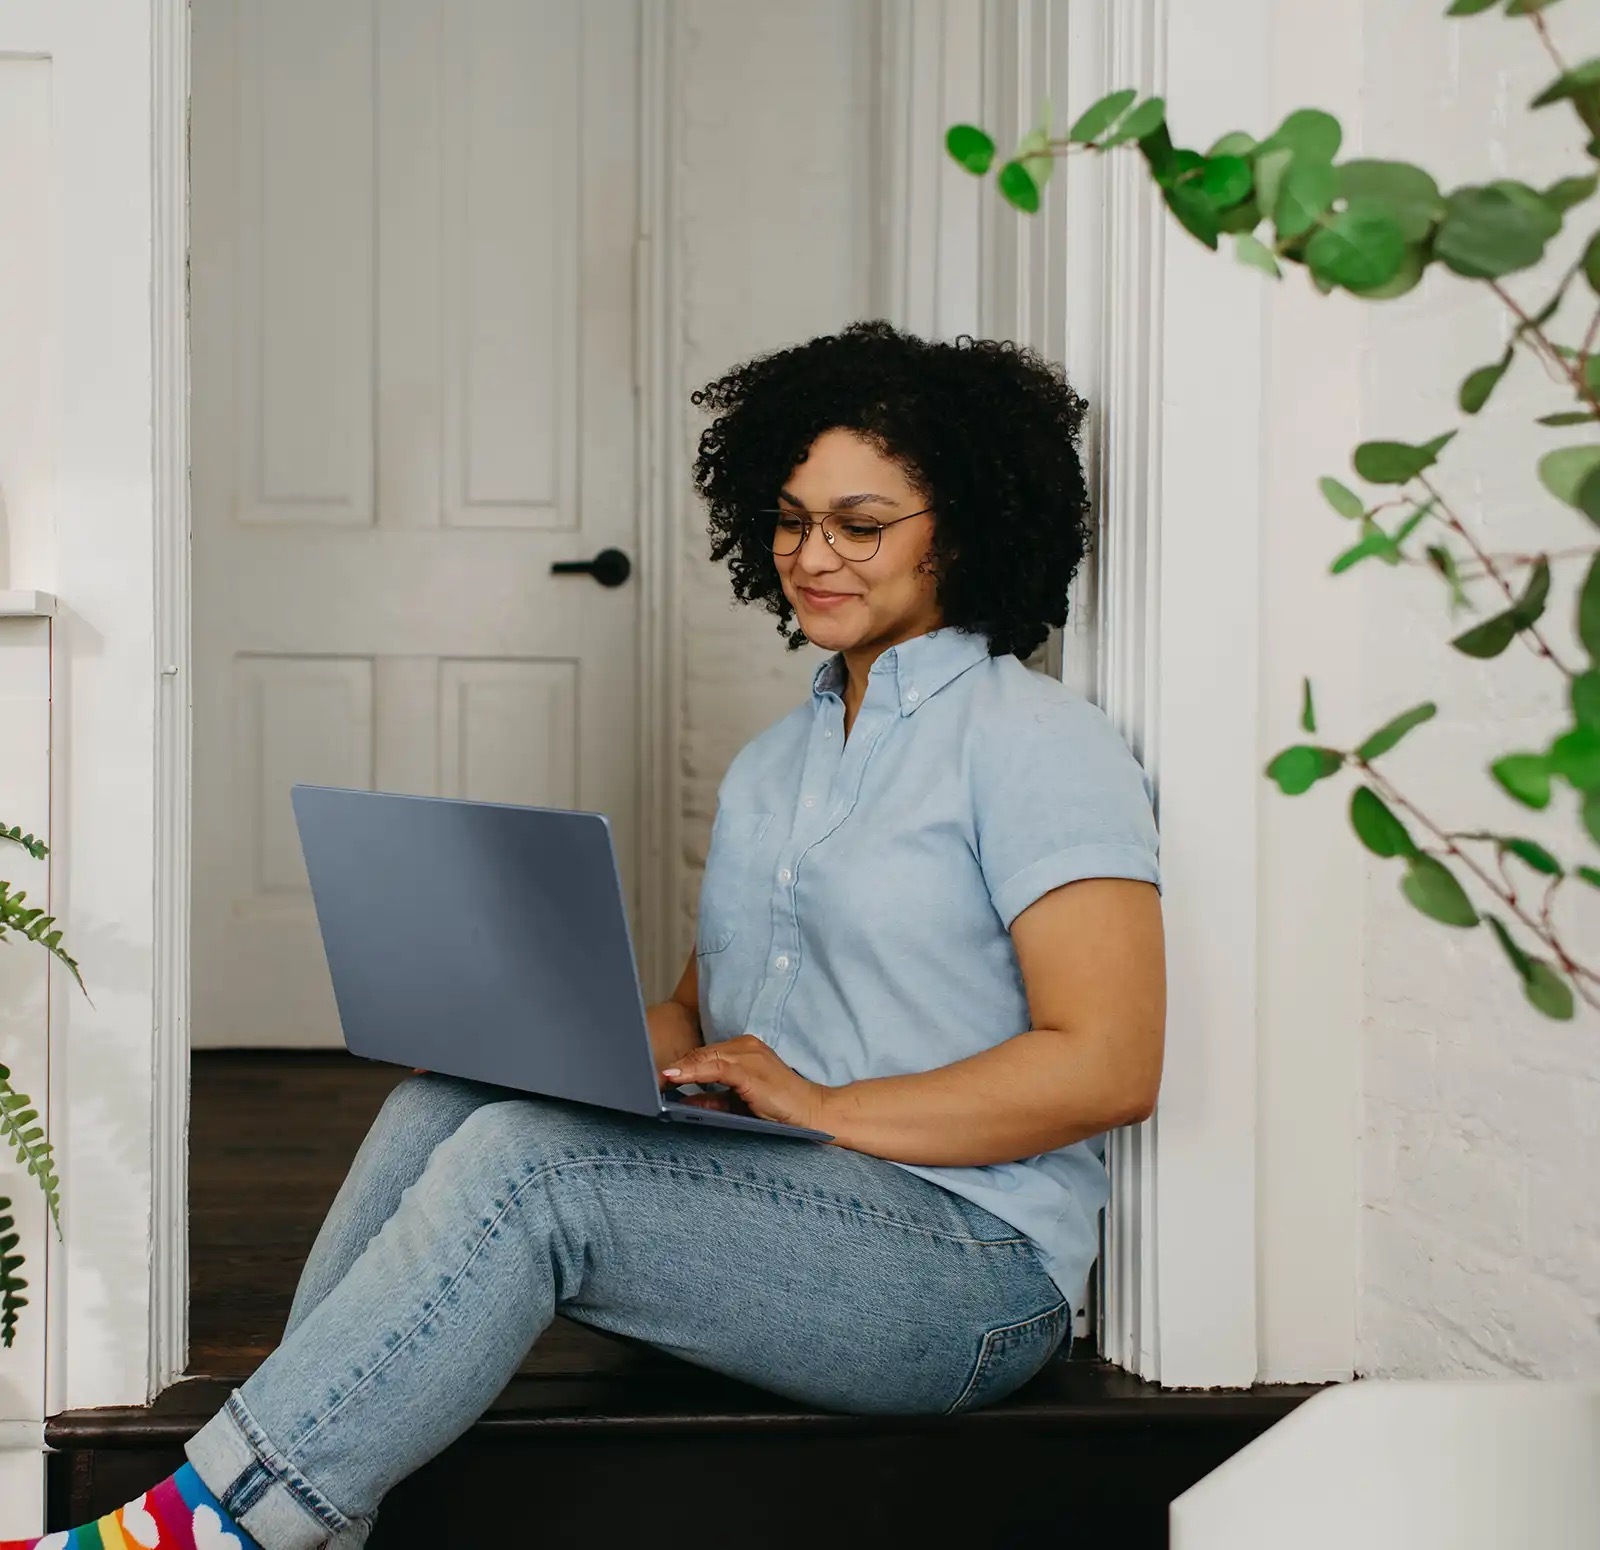 A curly haired woman sitting casually on her doorstep, working on a laptop.